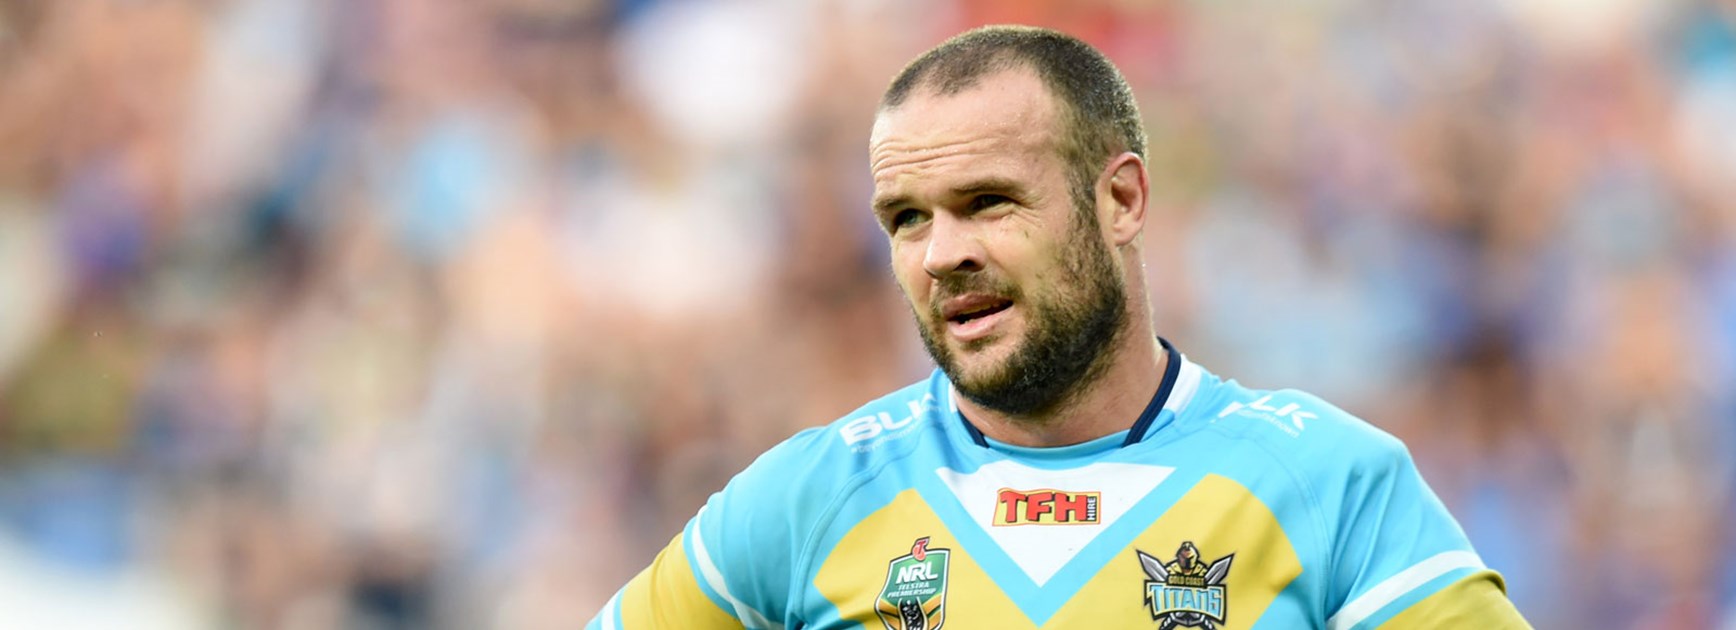 Titans captain Nate Myles will play his 200th NRL game against the Roosters on Sunday.